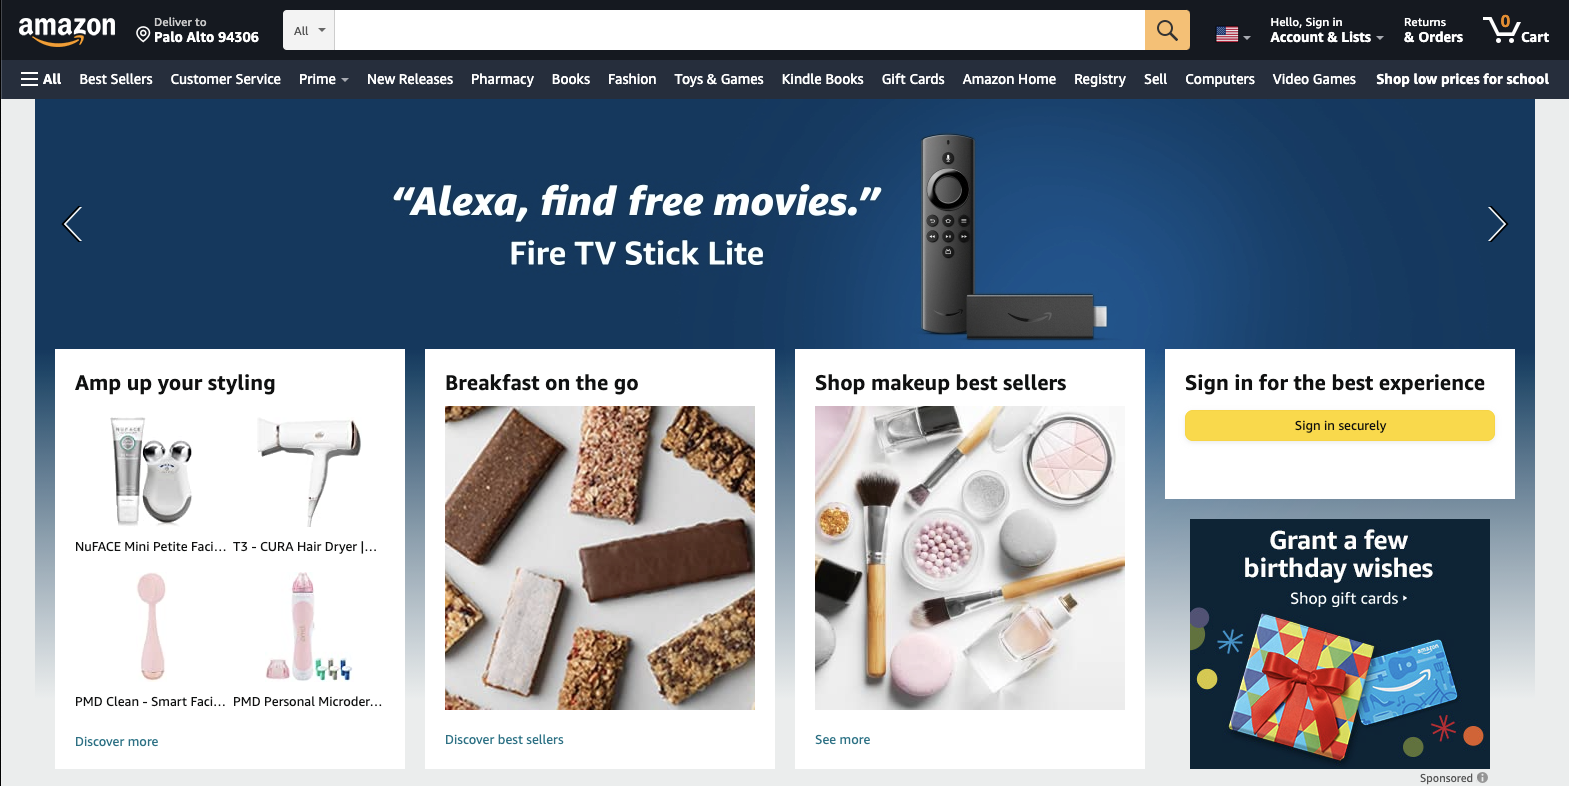 Visit Amazon Home page